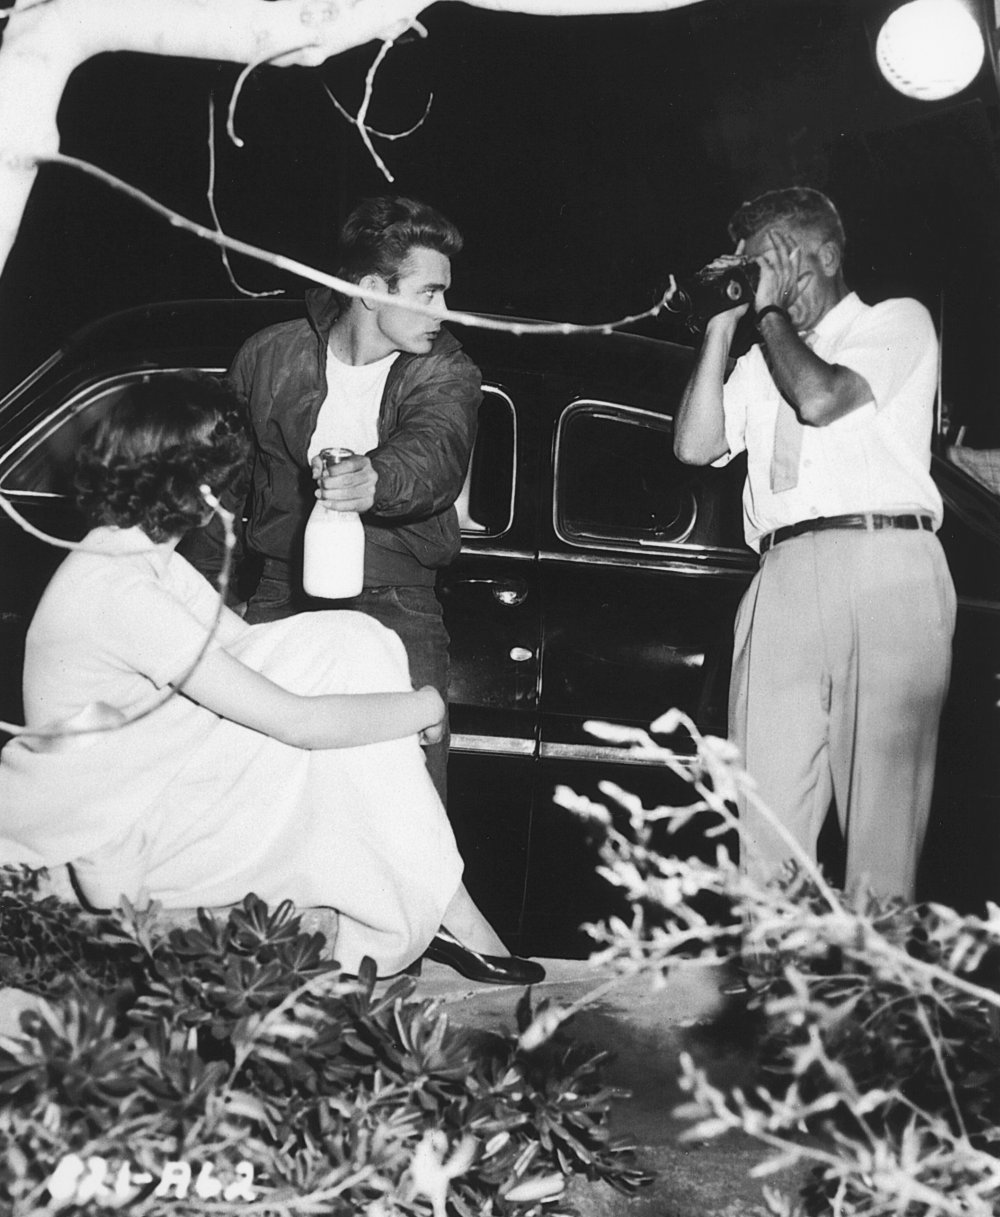 Milking the moment: director Nicholas Ray checks his viewfinder before filming a turbulent moment between James Dean and Natalie Wood